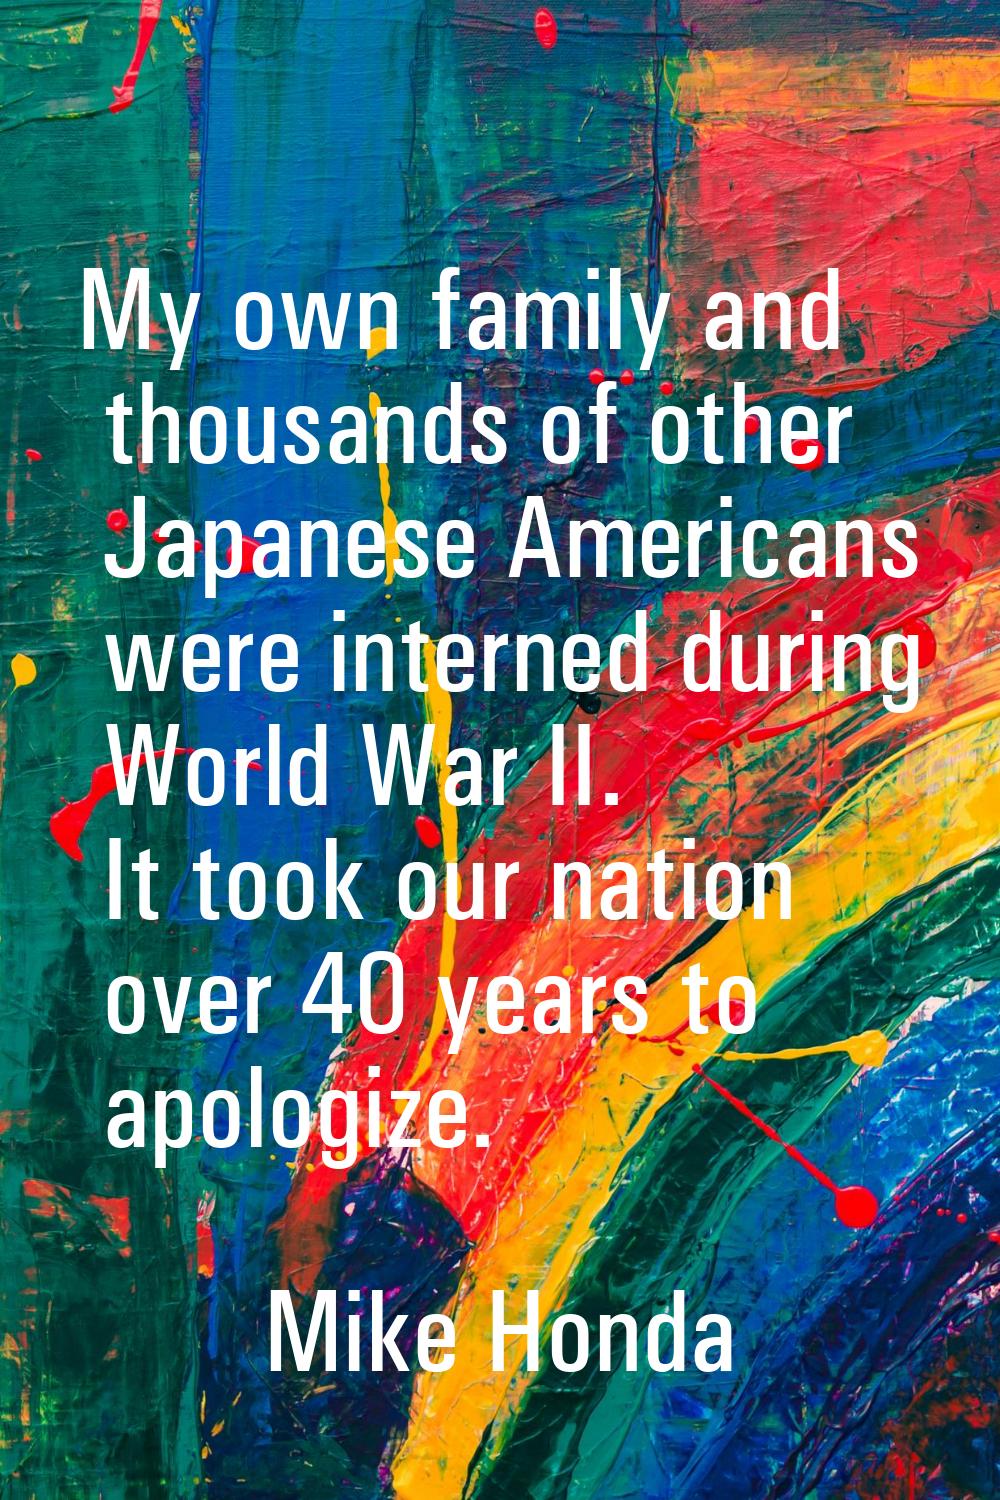 My own family and thousands of other Japanese Americans were interned during World War II. It took 